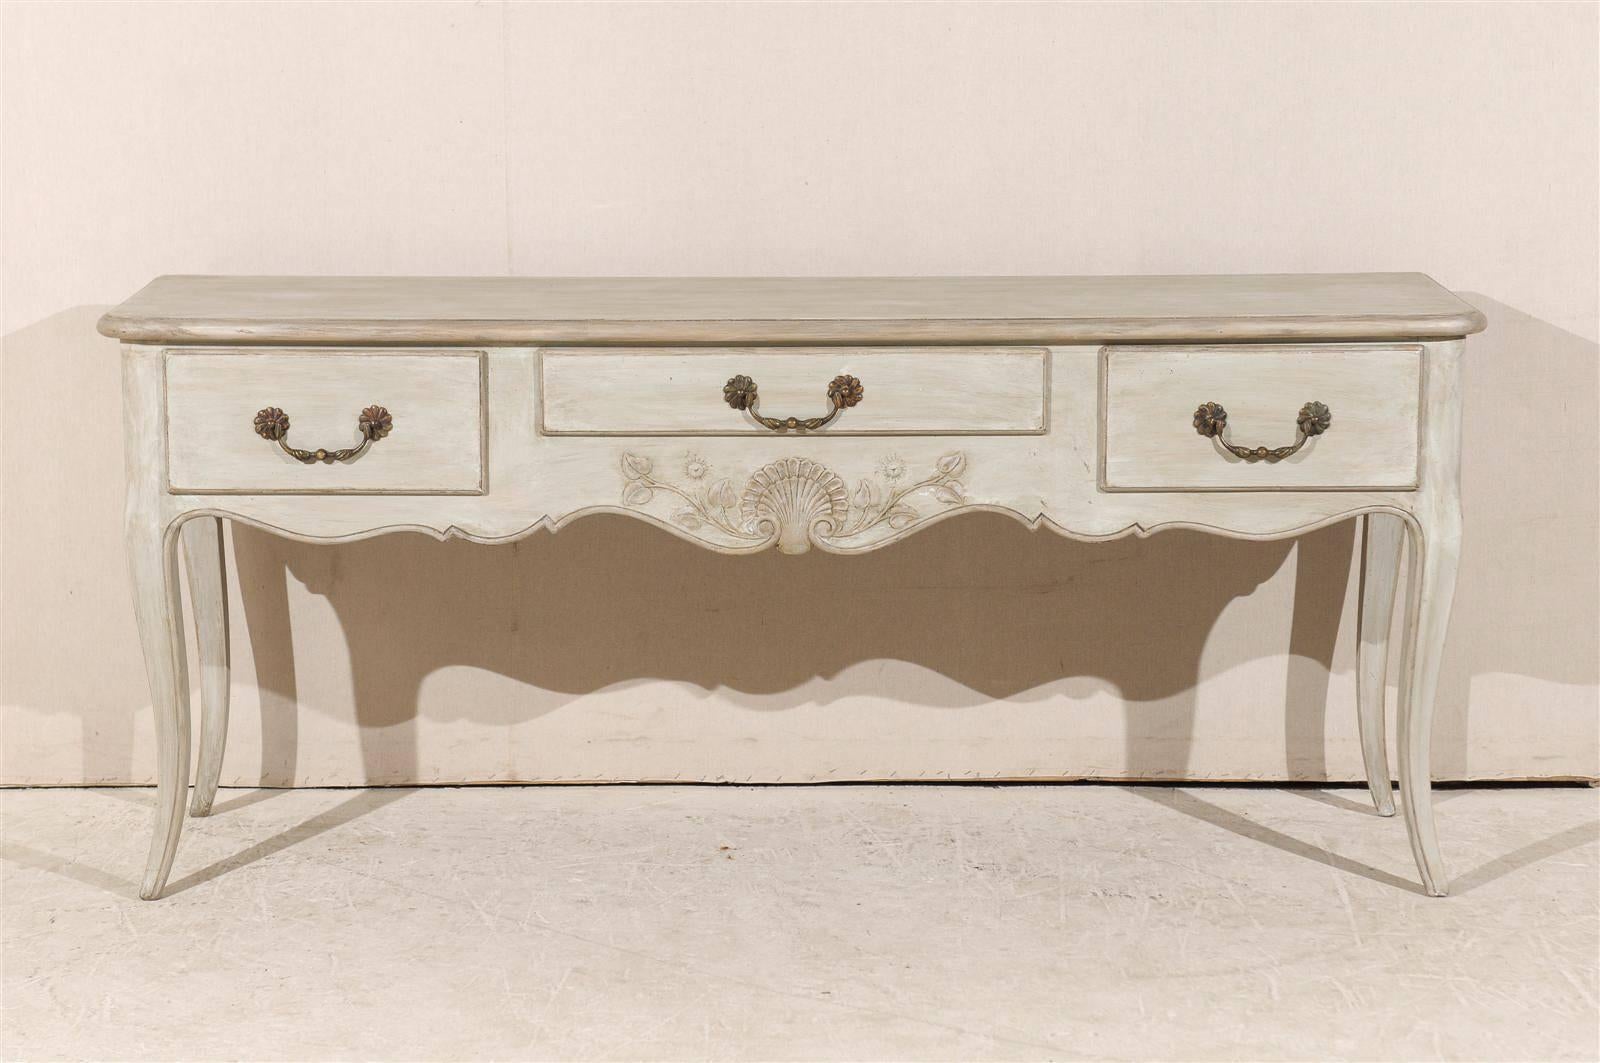 A French painted wood console table with three drawers, scalloped skirt with shell and floral carving and discreet cabriole legs from the 20th century.